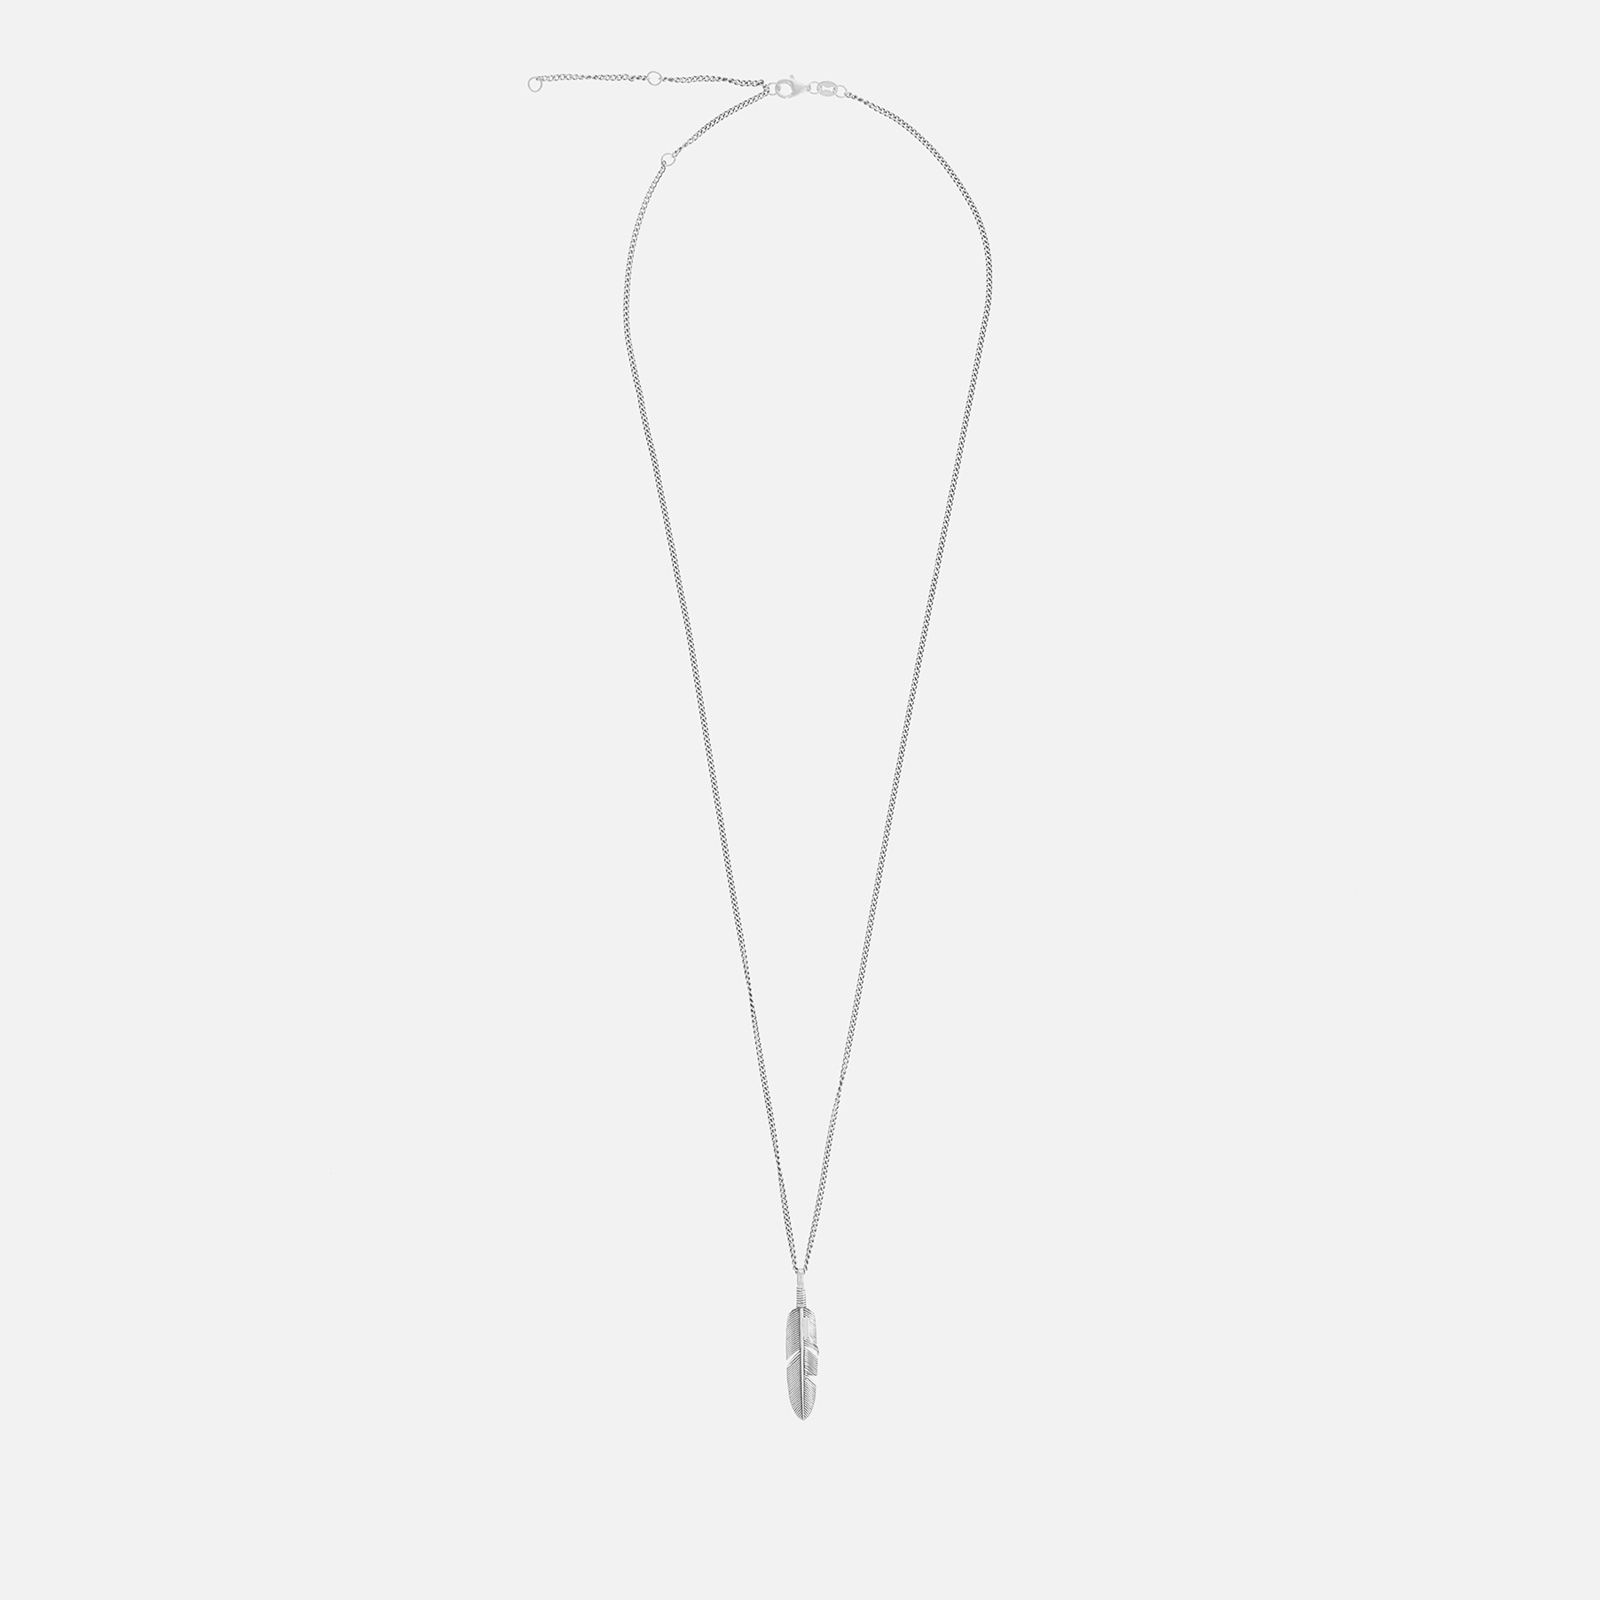 Serge DeNimes Men's Ethereal Feather Necklace - 925 Sterling Silver